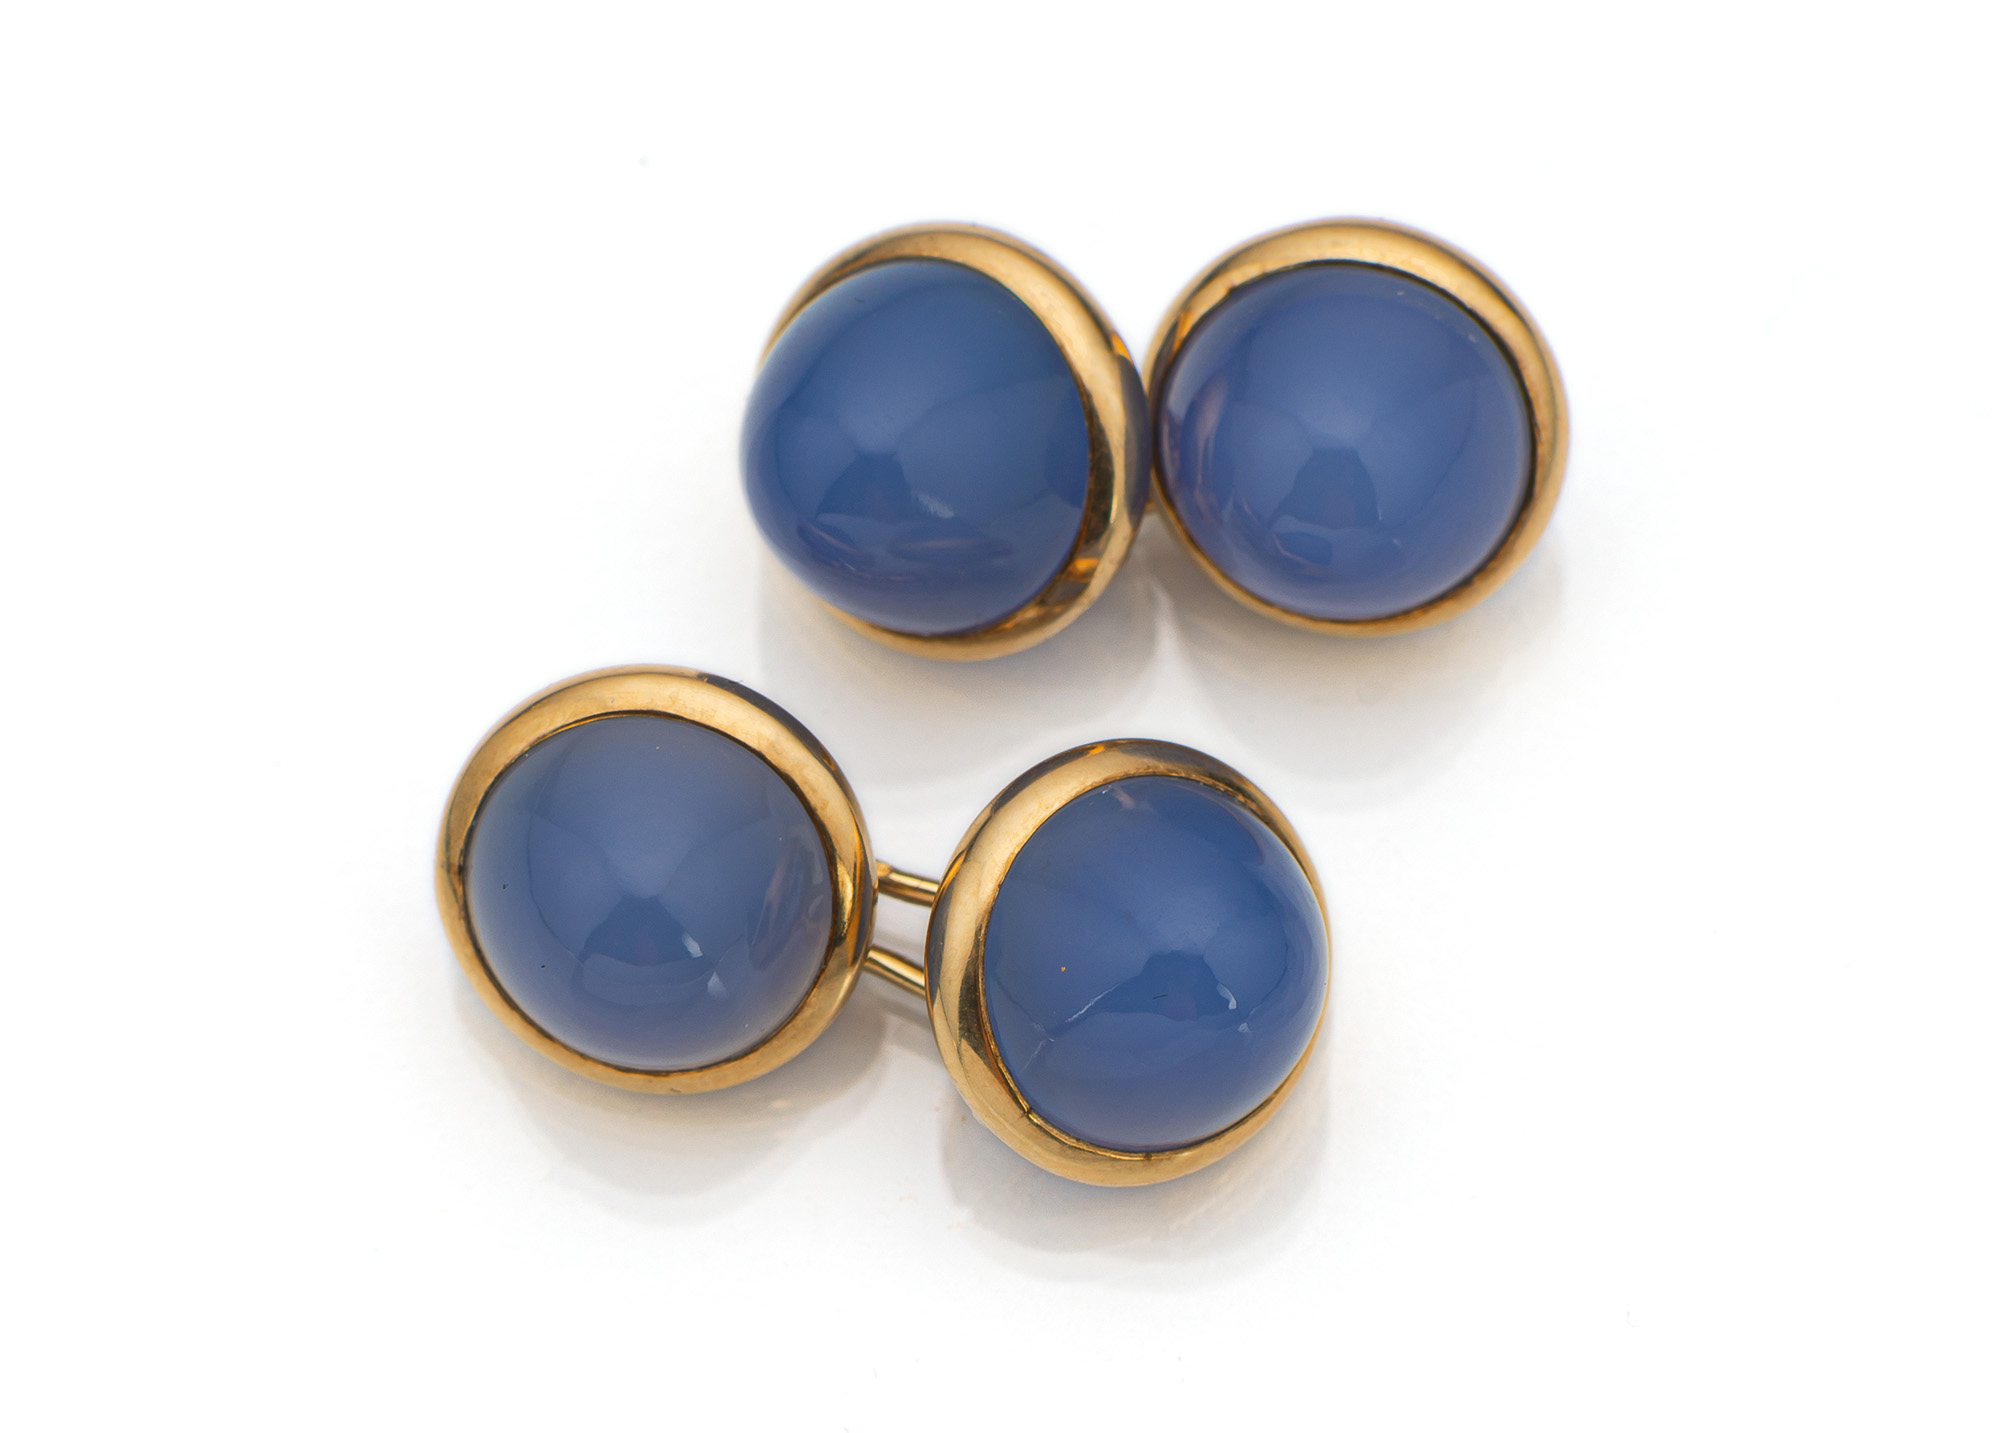 <b>A PAIR OF CUFF LINKS WITH BLUE AGATE</b>